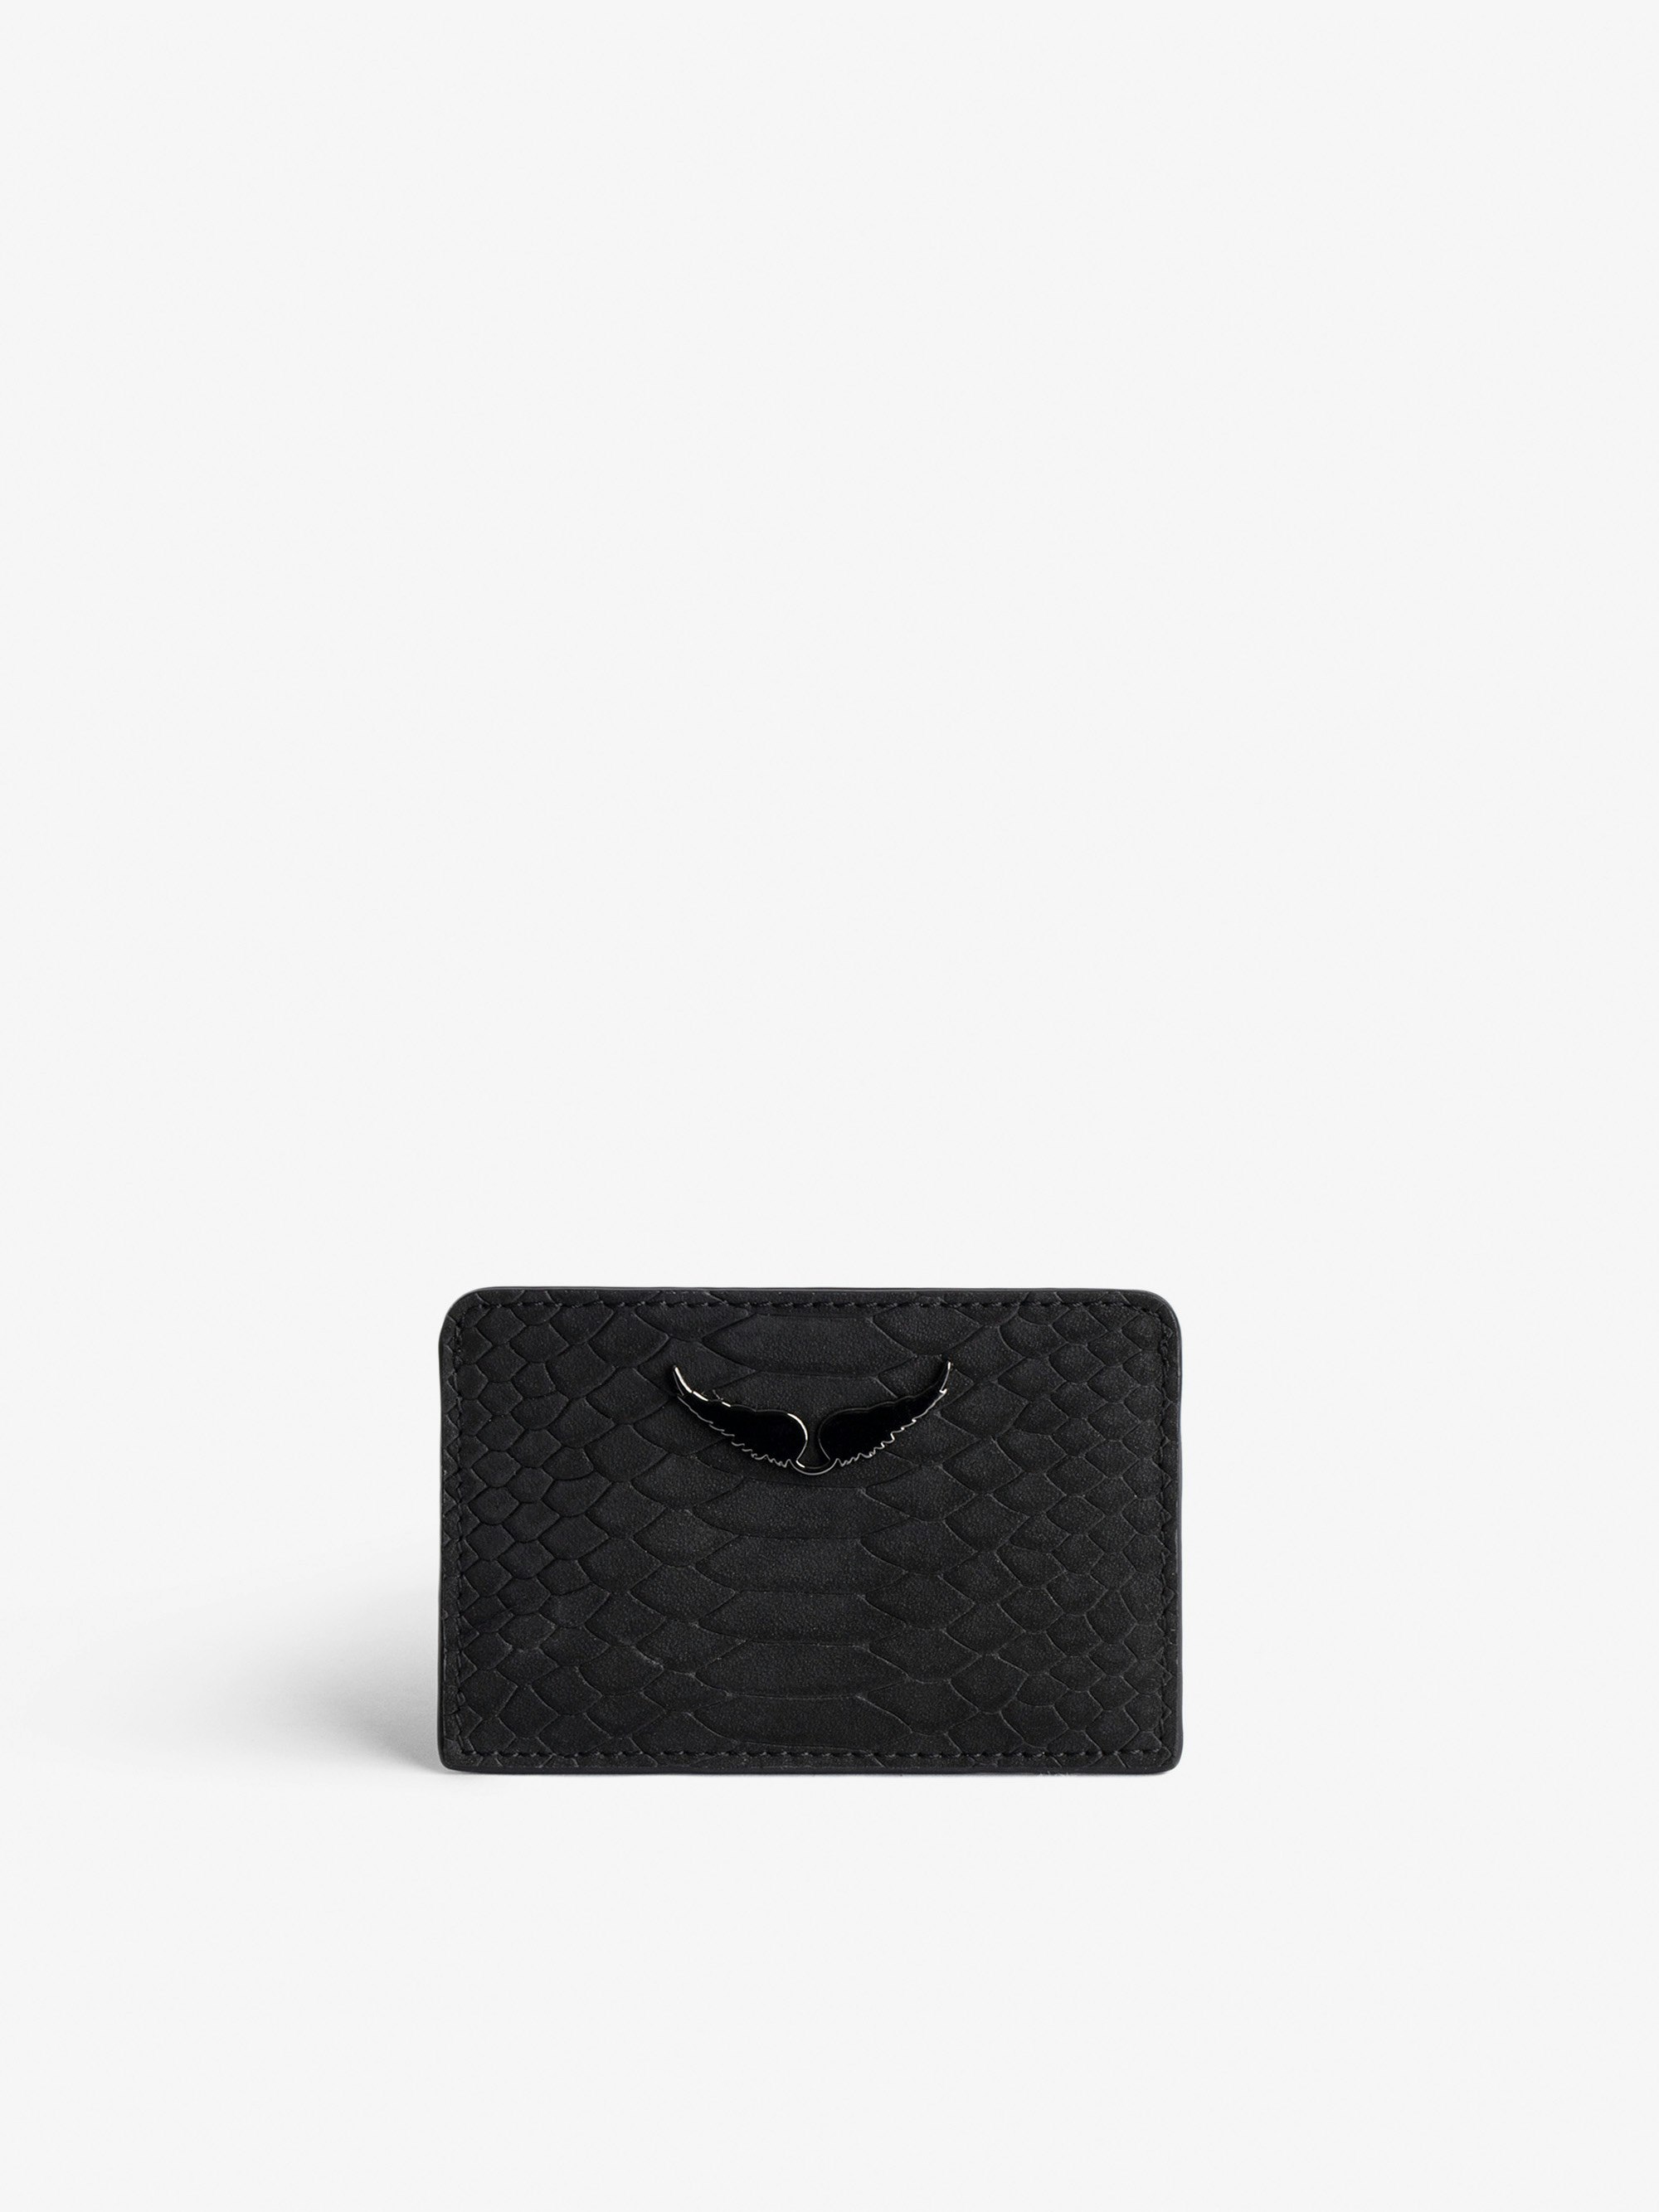 ZV Soft Savage Pass Card Case - Women's card case in black python-effect leather